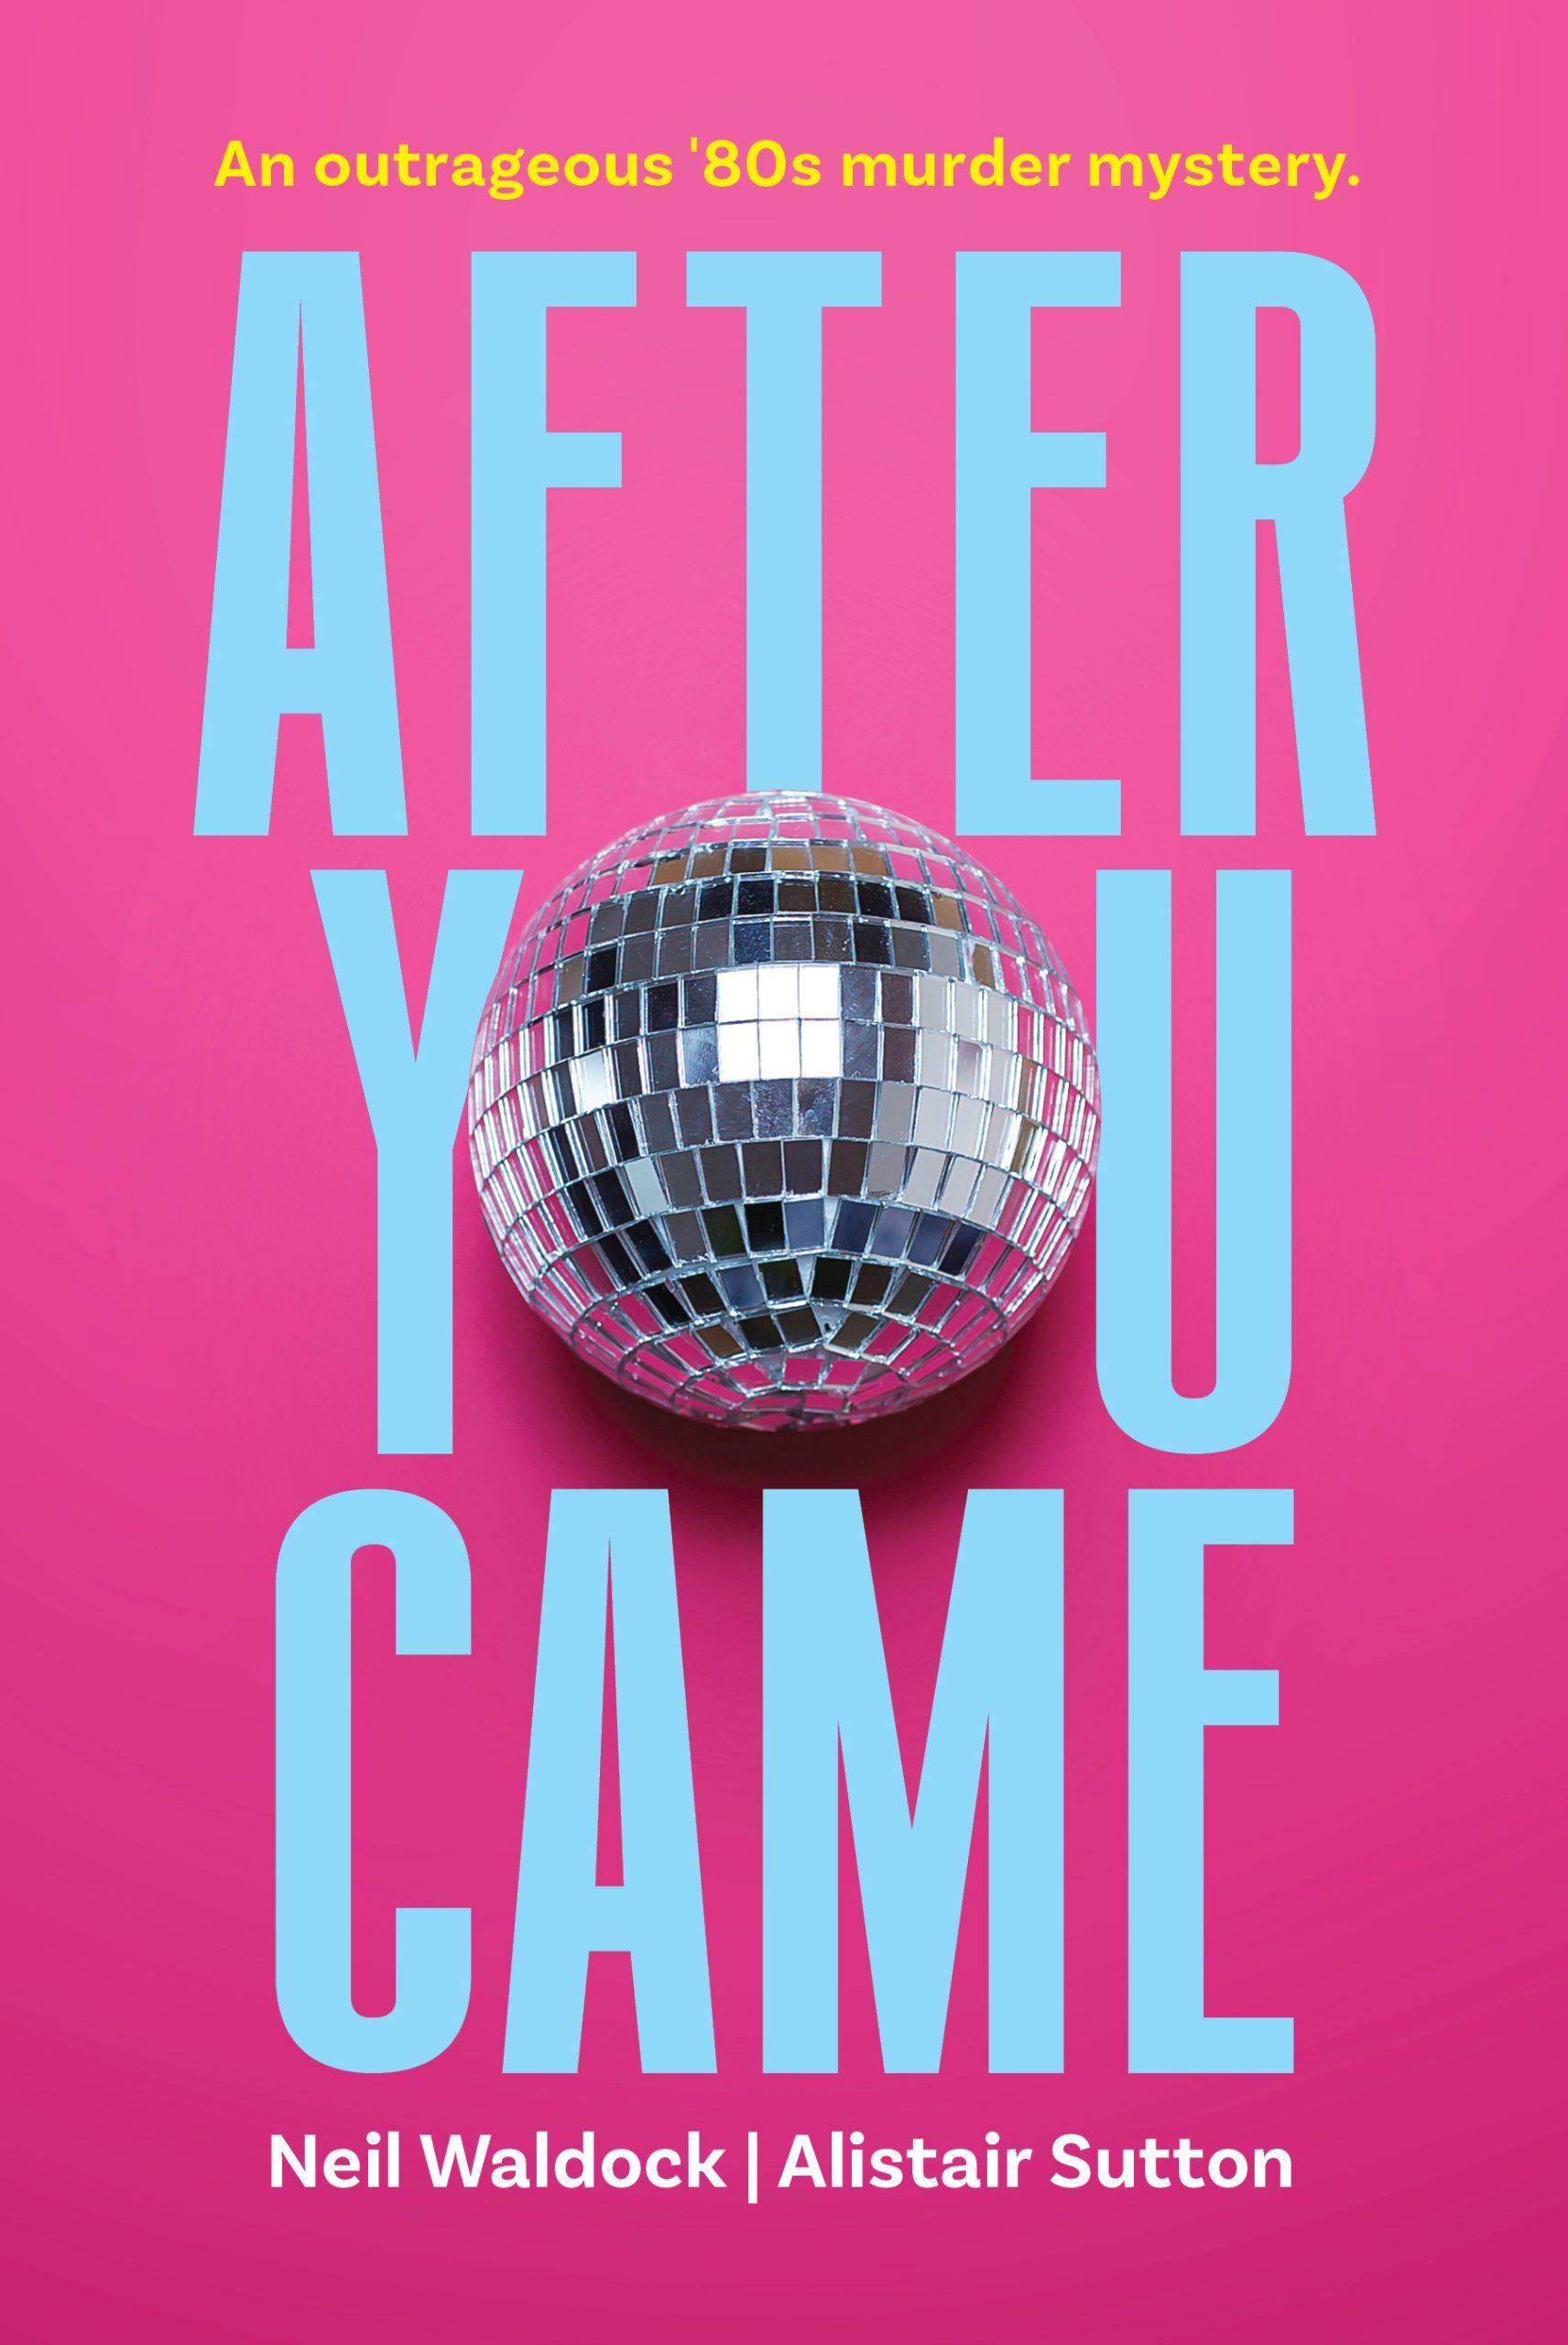 Stock image cover example: After you came